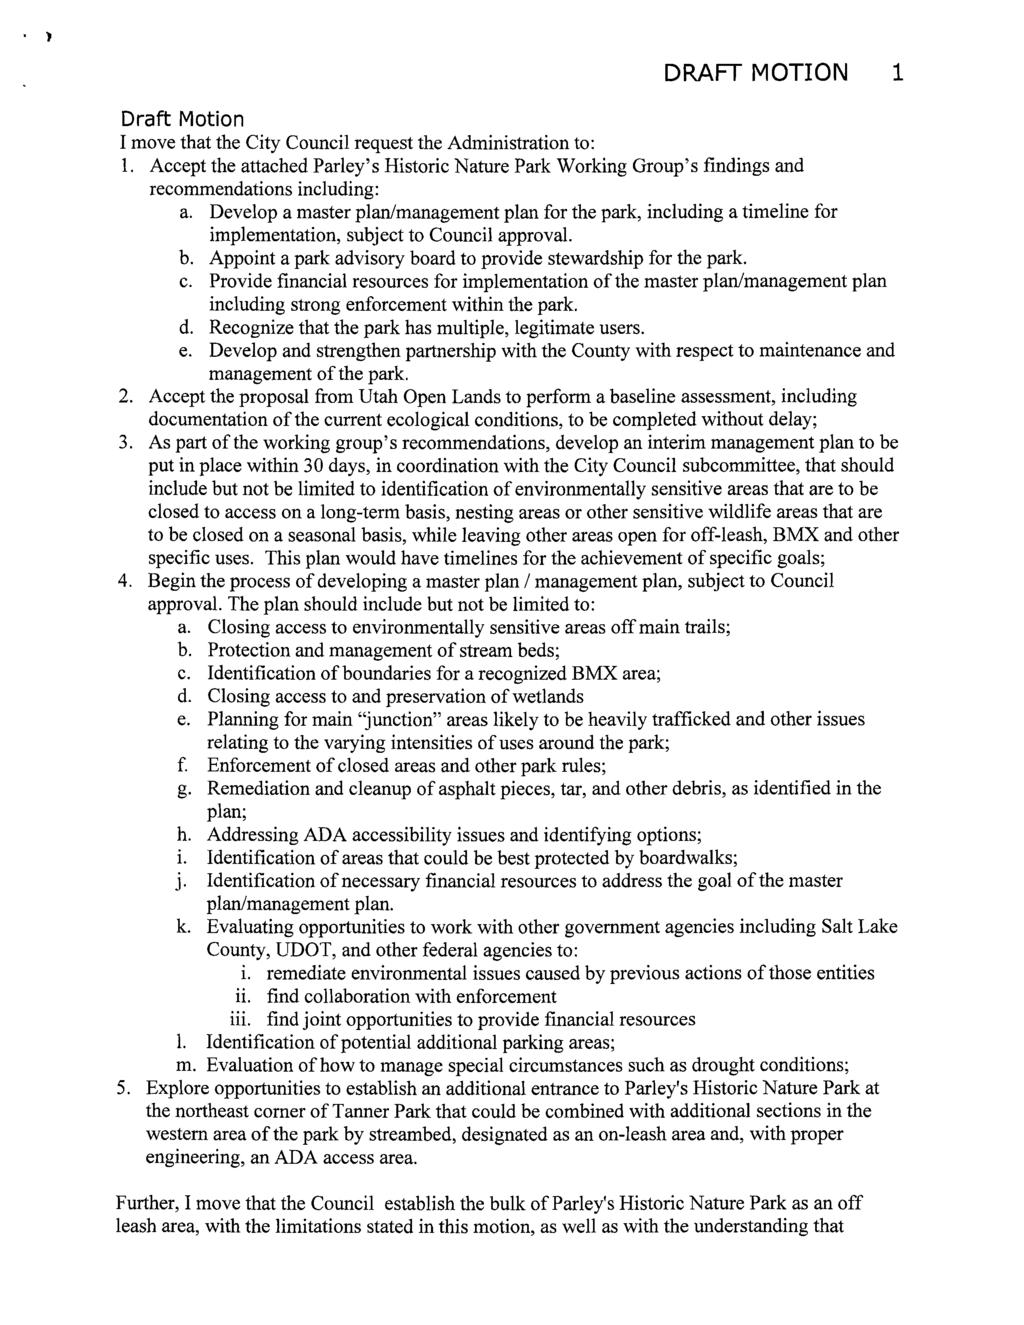 DRAFTMOTION I Draft Motion I move that the City Council request the Administration to: 1. Accept the attached Parley's Historic Nature Park Working Group's findings and recommendations including: a.